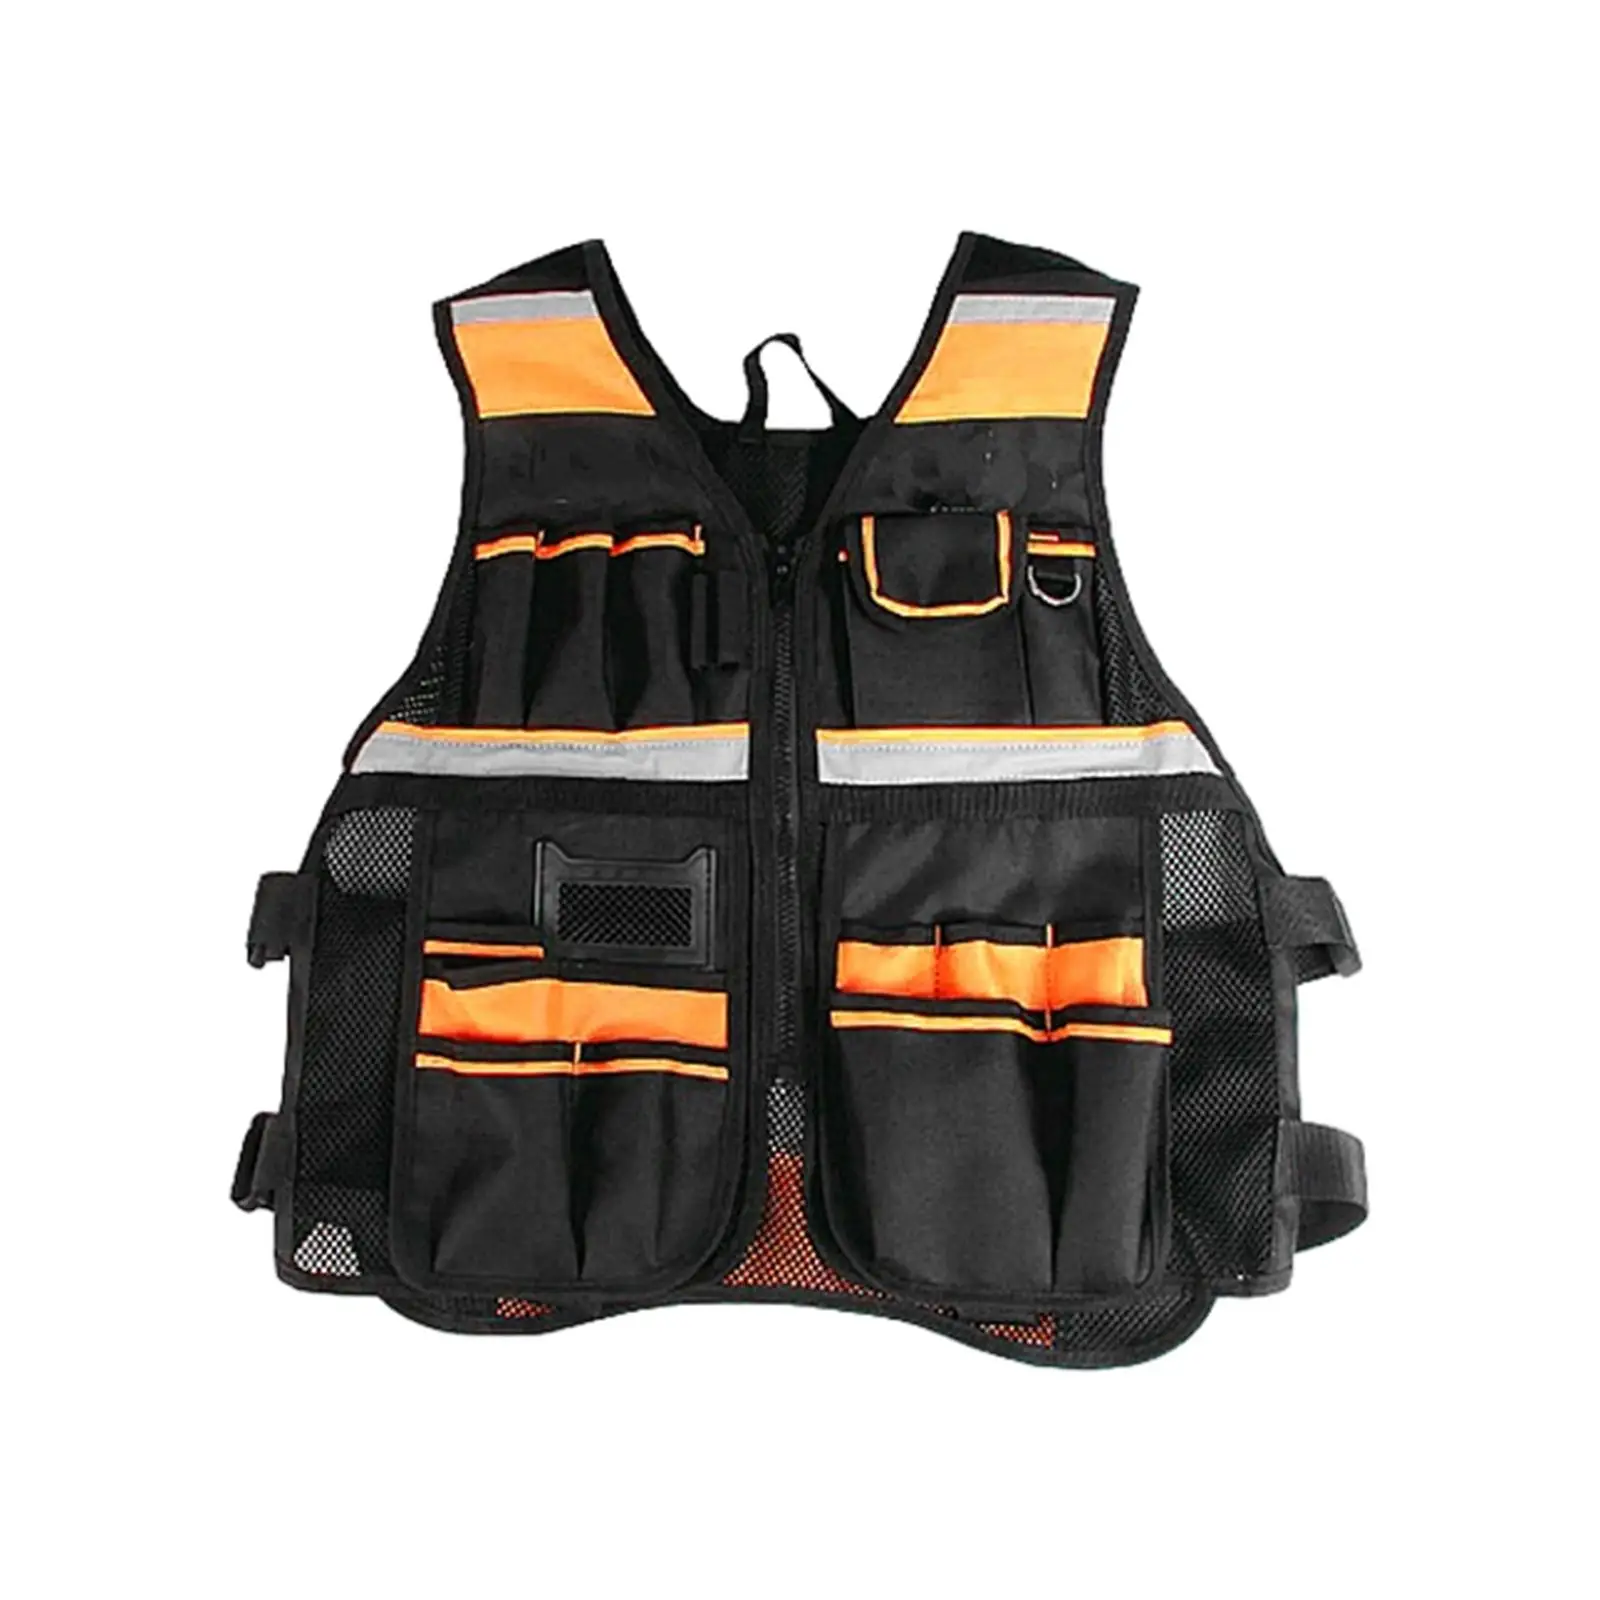 Tool Vest Reflective Electrician Carpenters Multi Pockets for Industrial Construction Site Work Gardening Household Outdoor Work